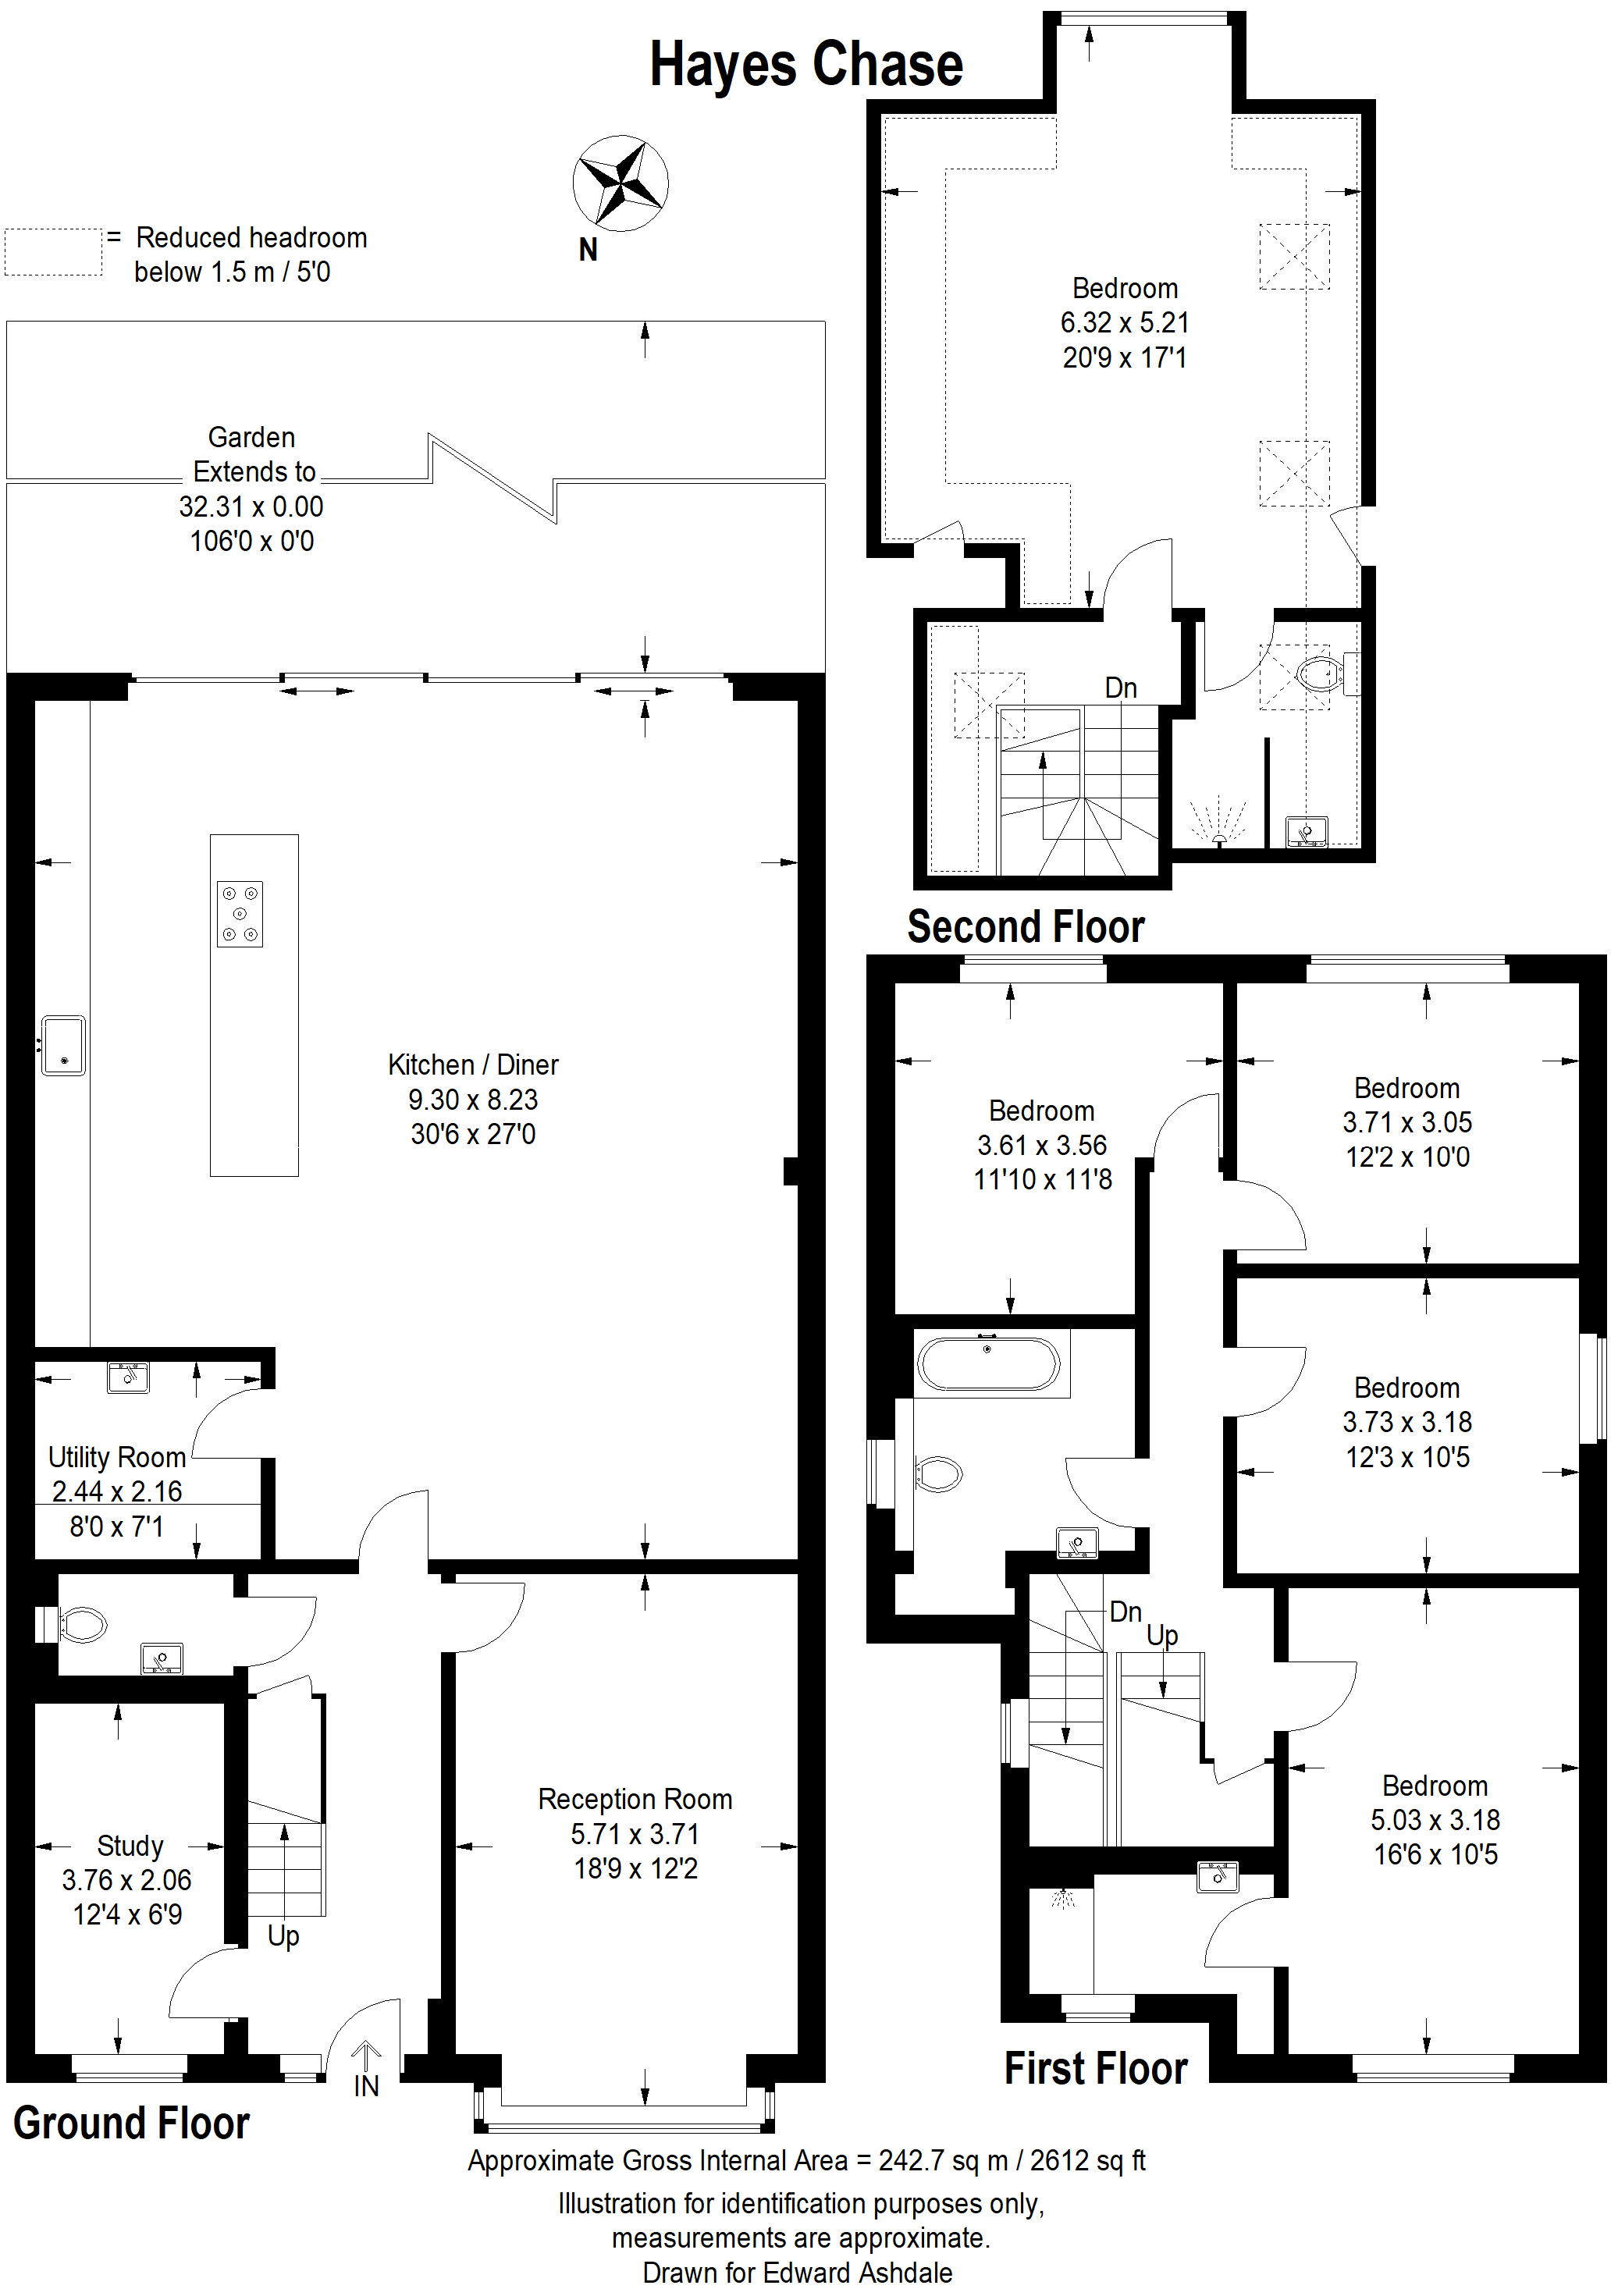 5 bed detached house for sale in Hayes Chase, West wickham - Property floorplan